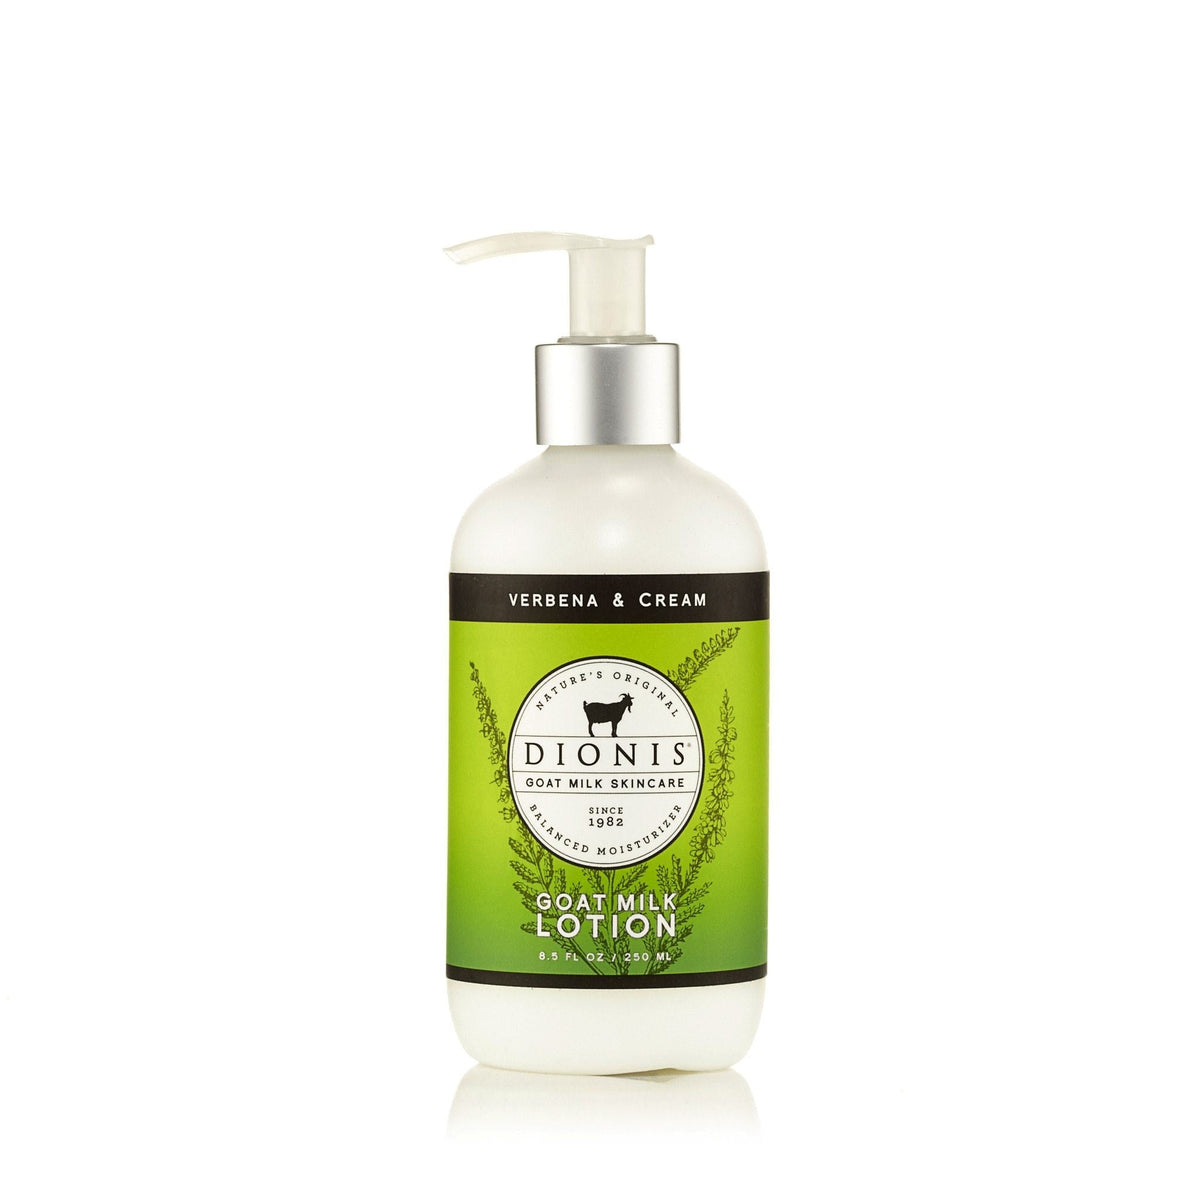 Verbena and Cream Body Lotion by Dionis 8.5 oz.